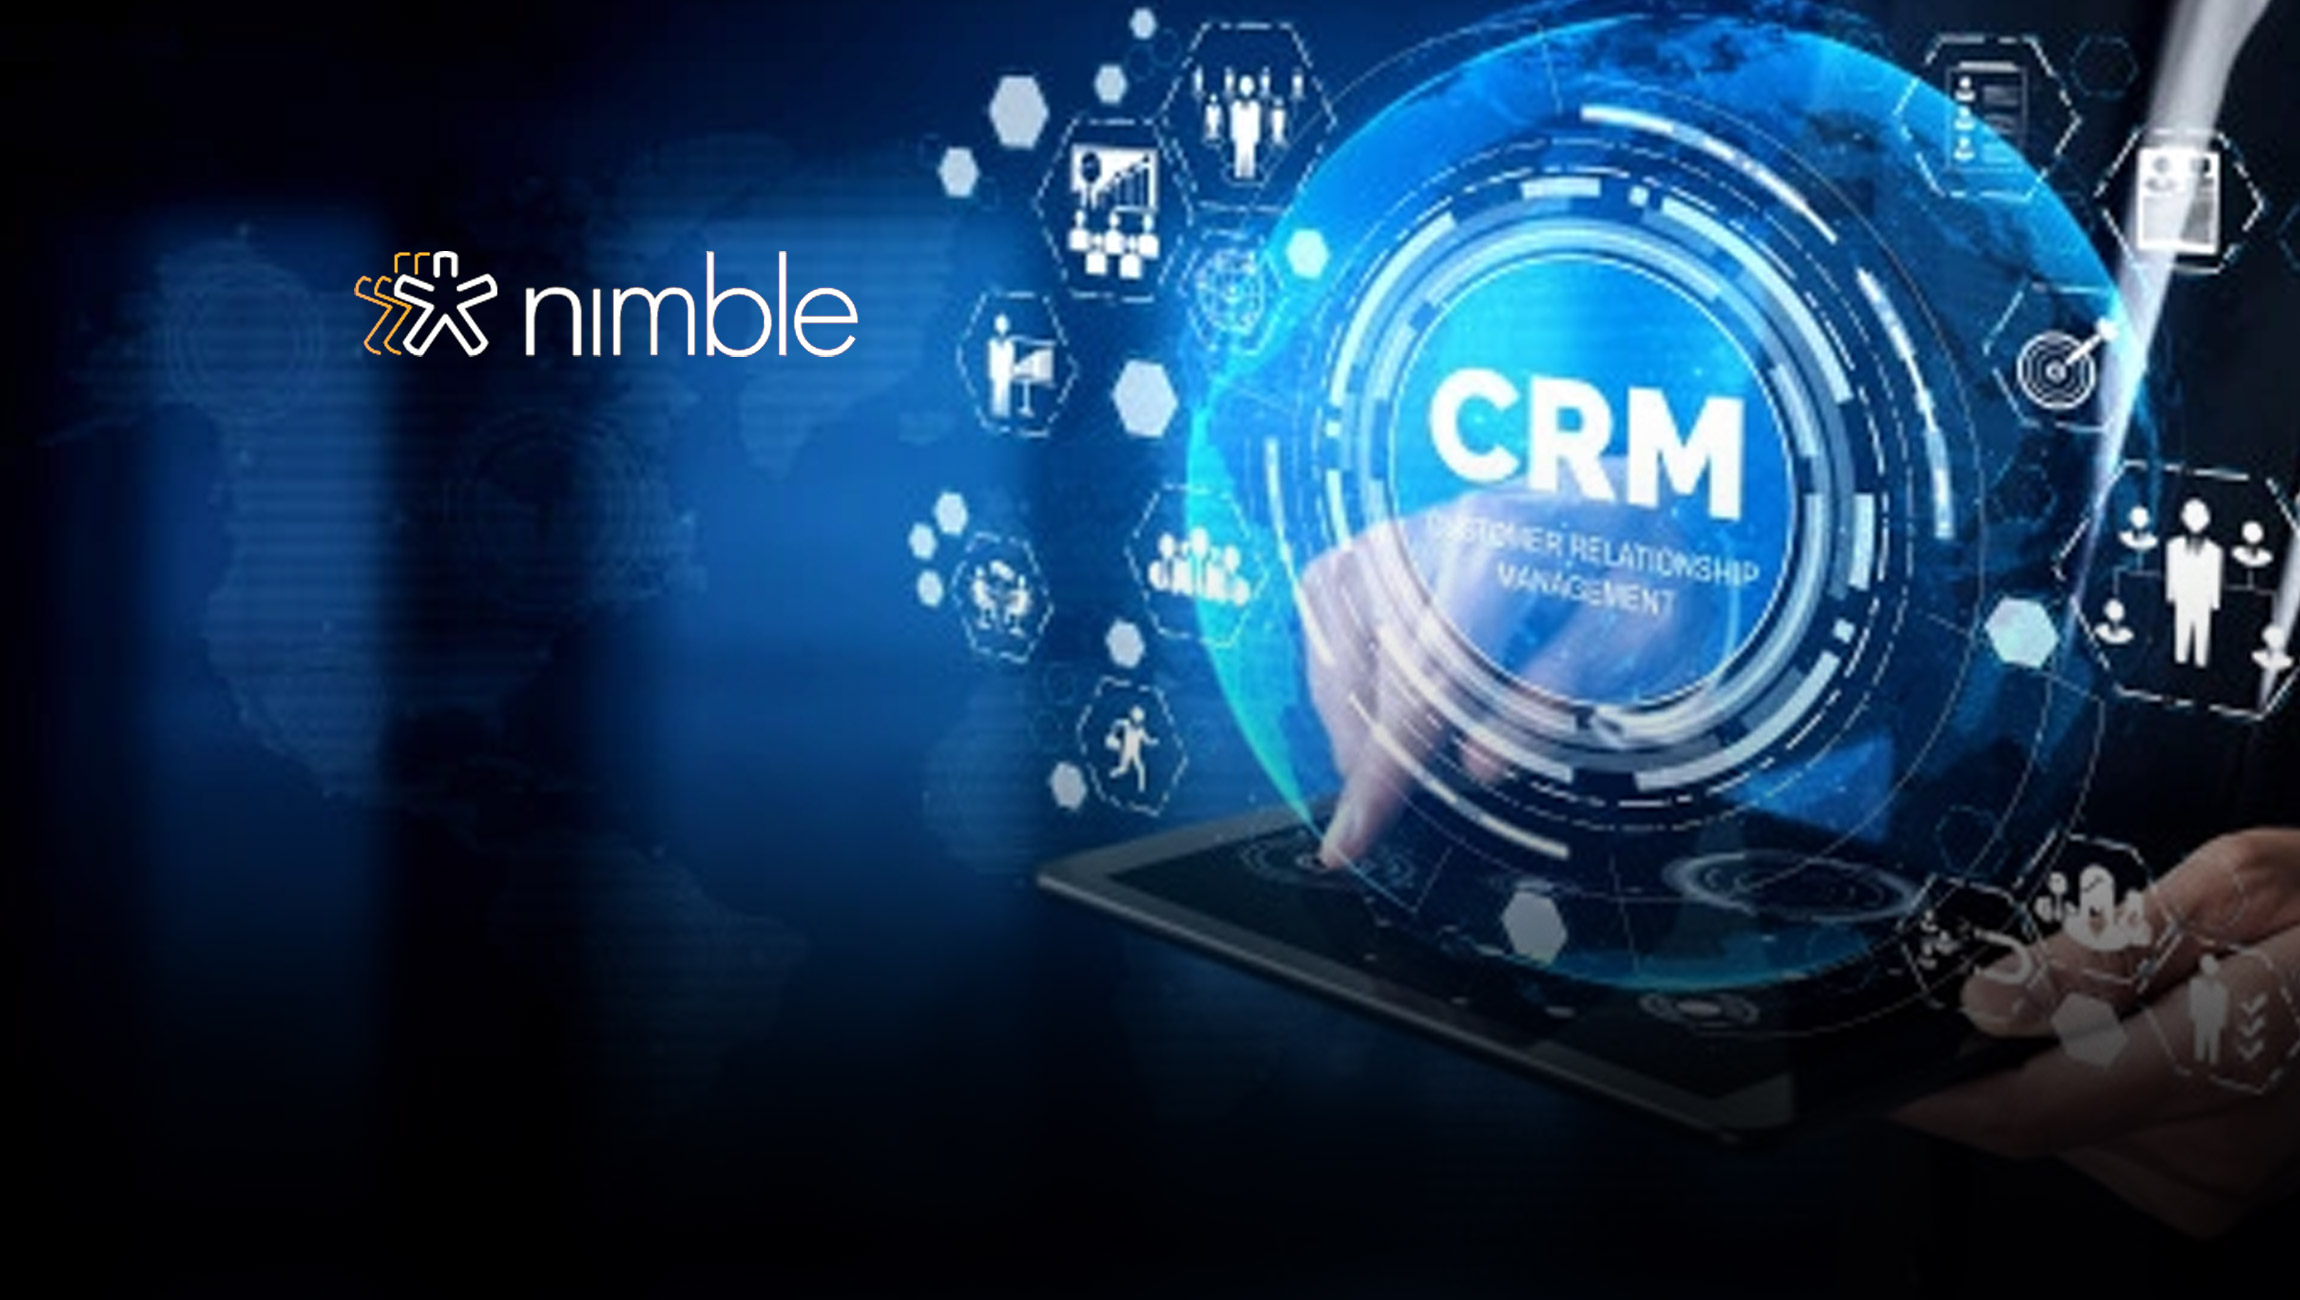 Nimble Supports Entrepreneurship for U.S. Veterans with Free CRM Software to Help Them Grow